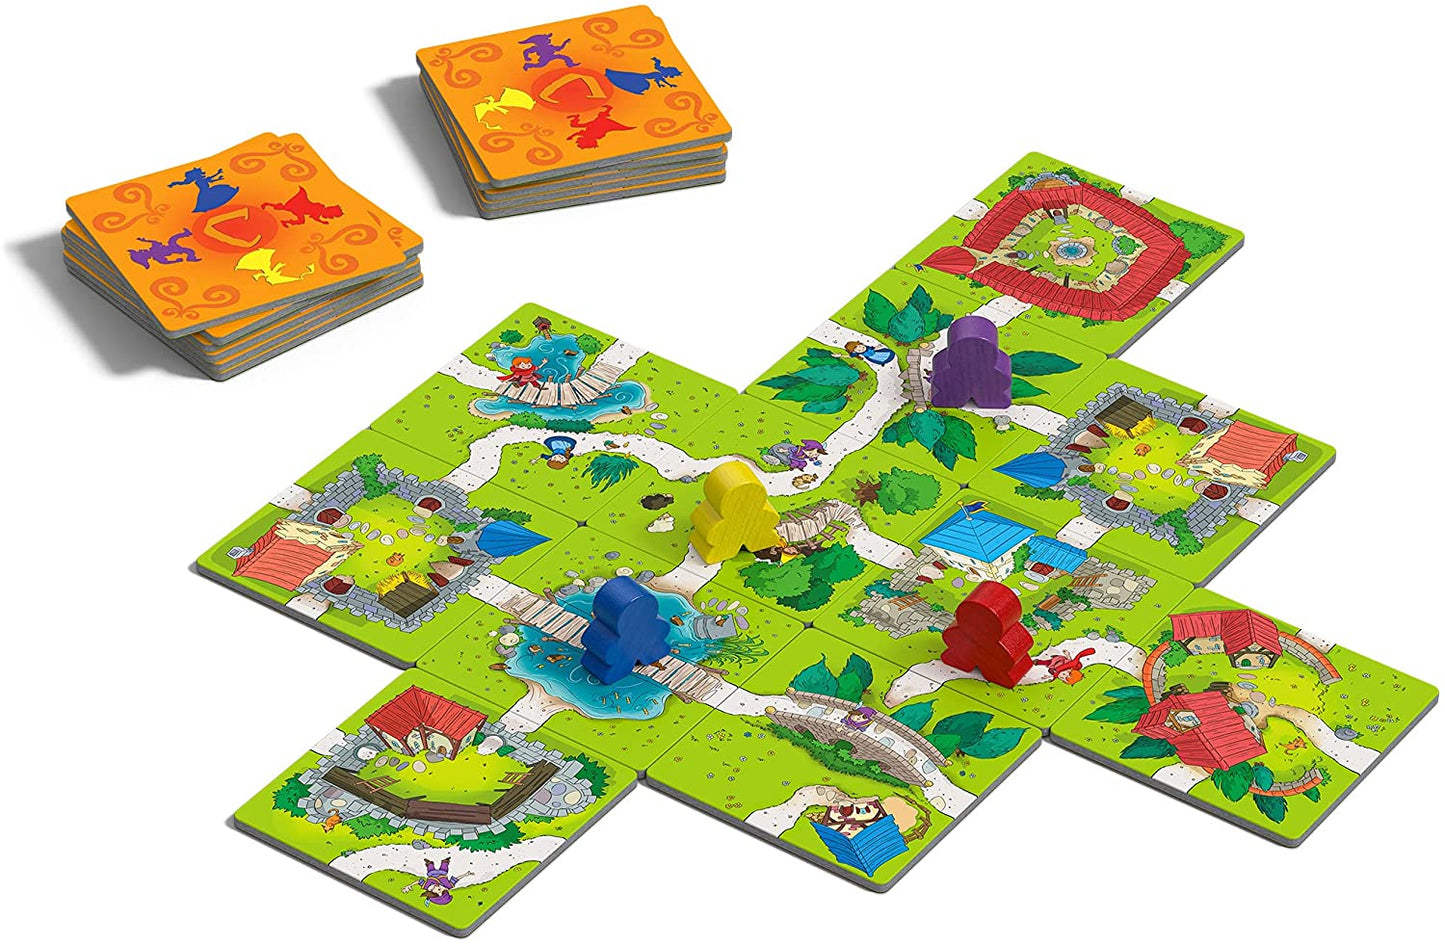 Game - My First Carcassonne